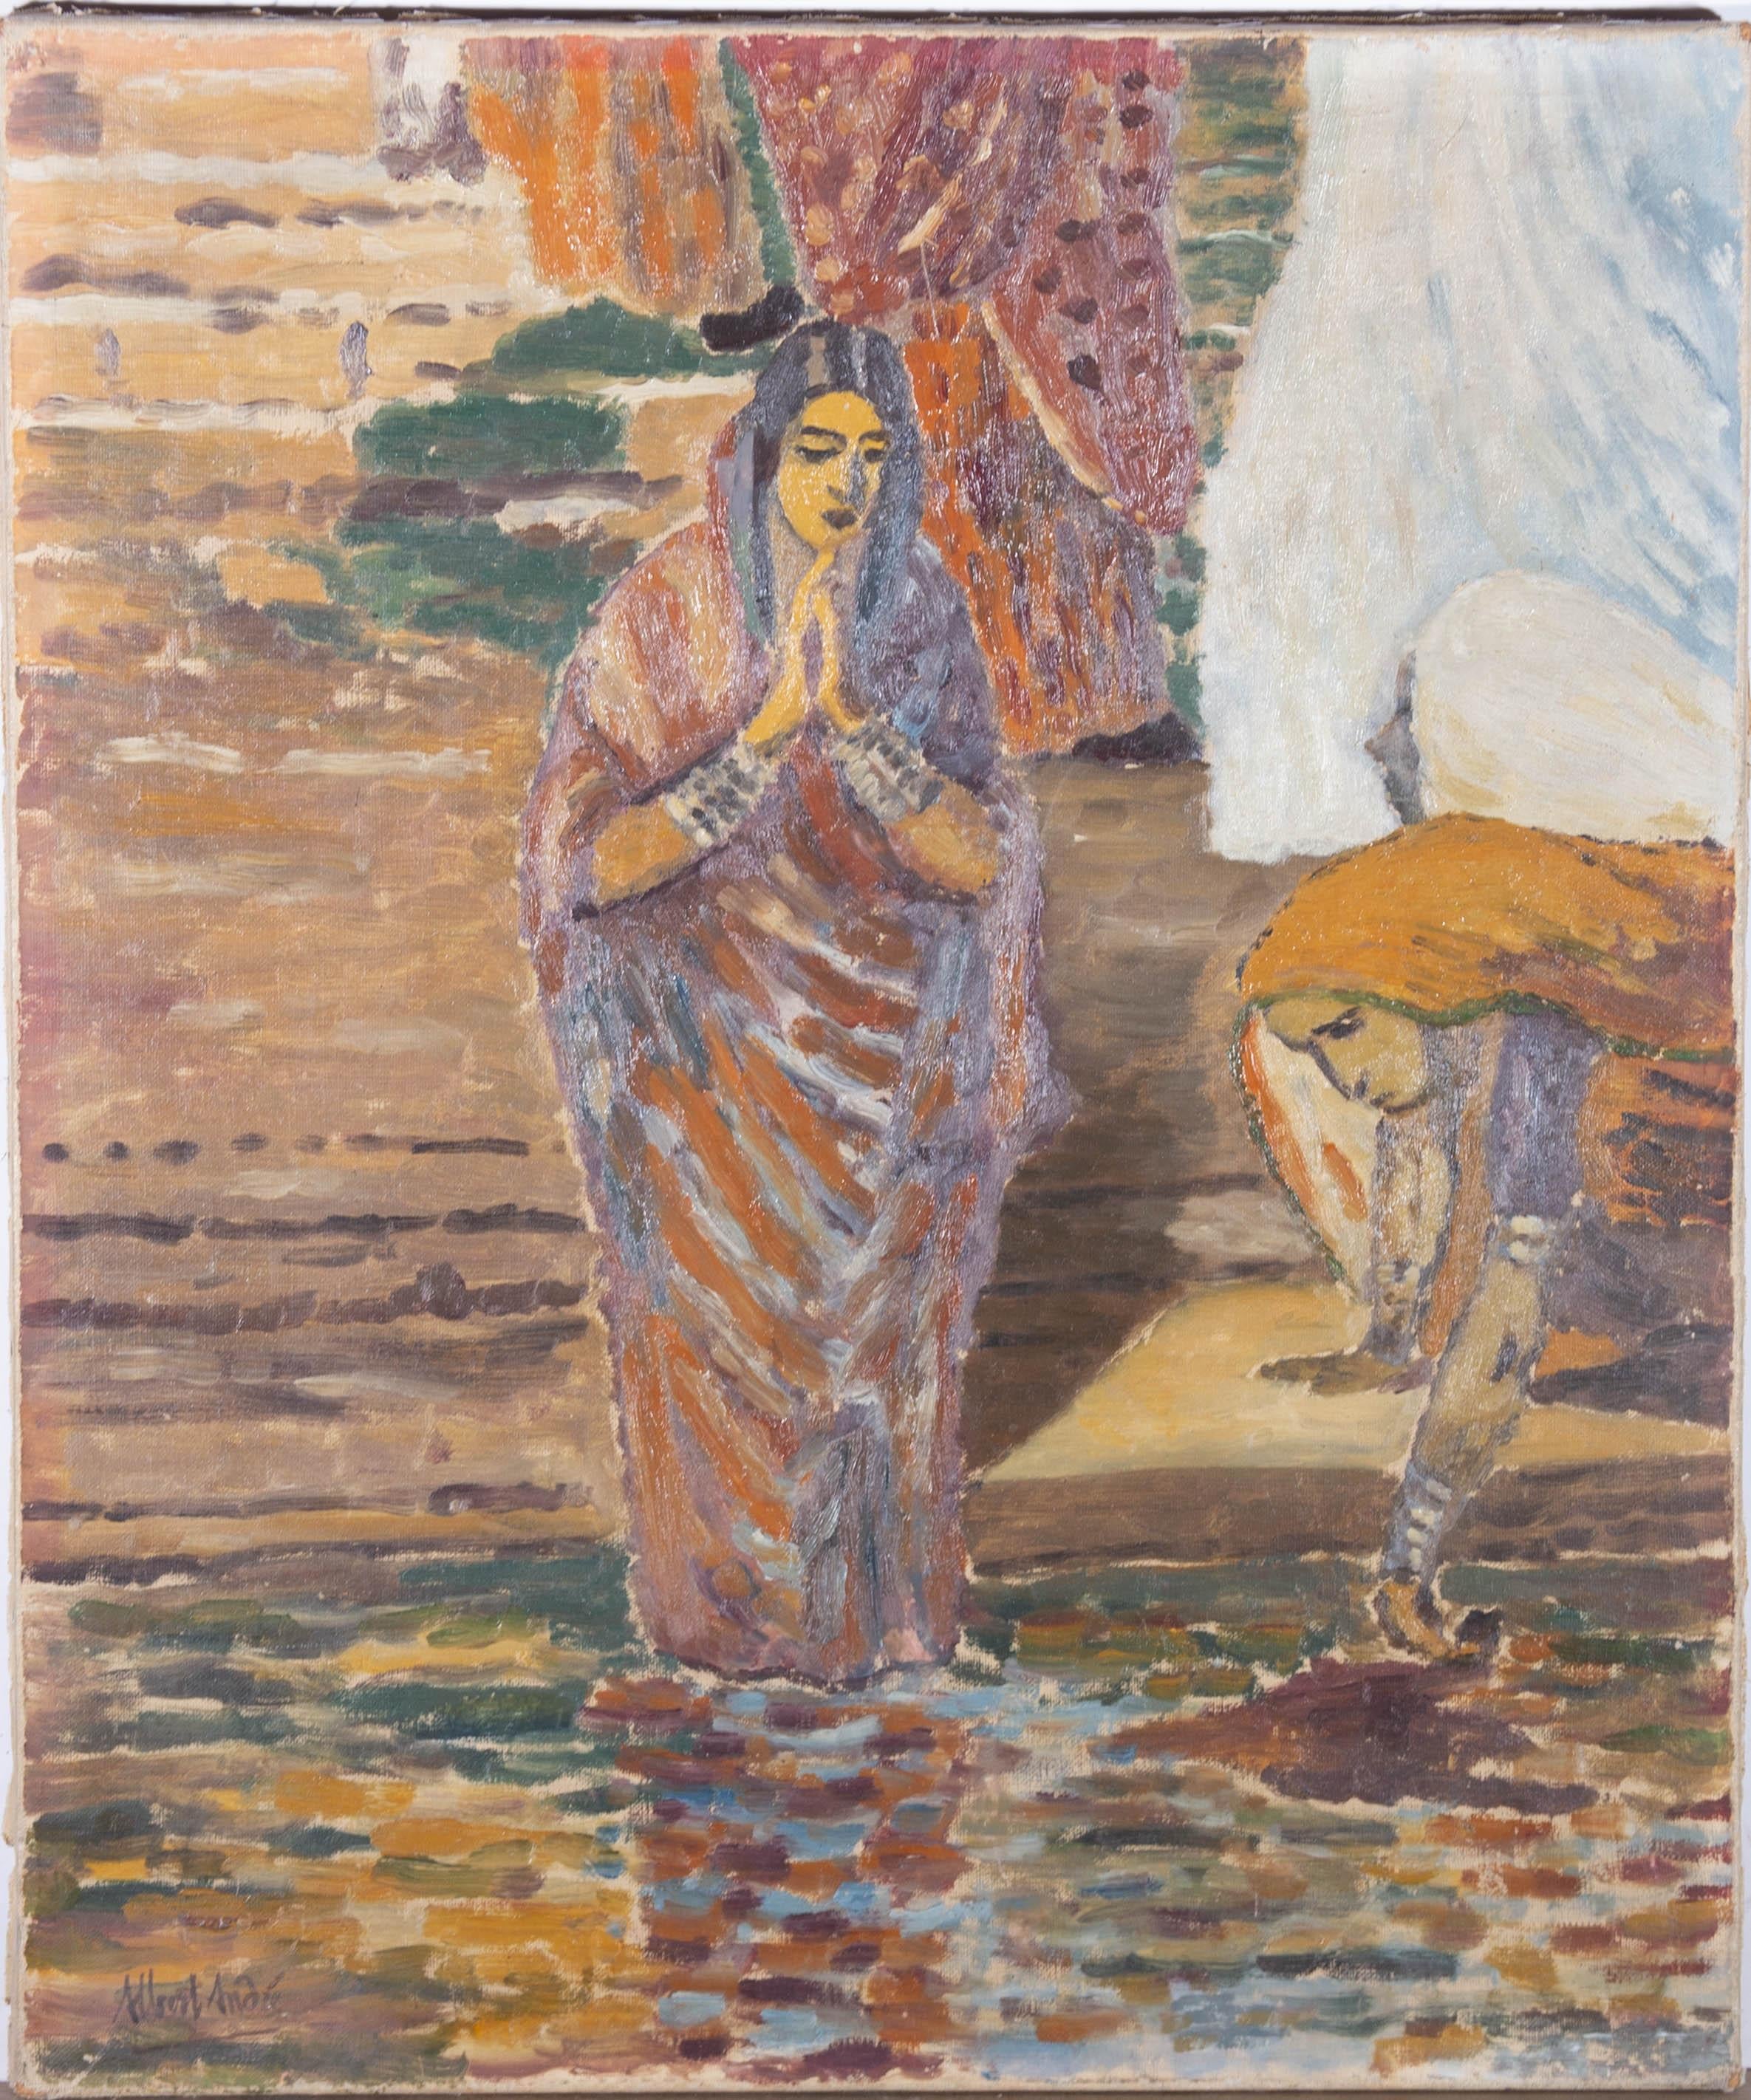 Attribué. Albert Andr (1869-1954) - 1893 Huile, Washing In The Ganges - Painting de Attrib. Albert André